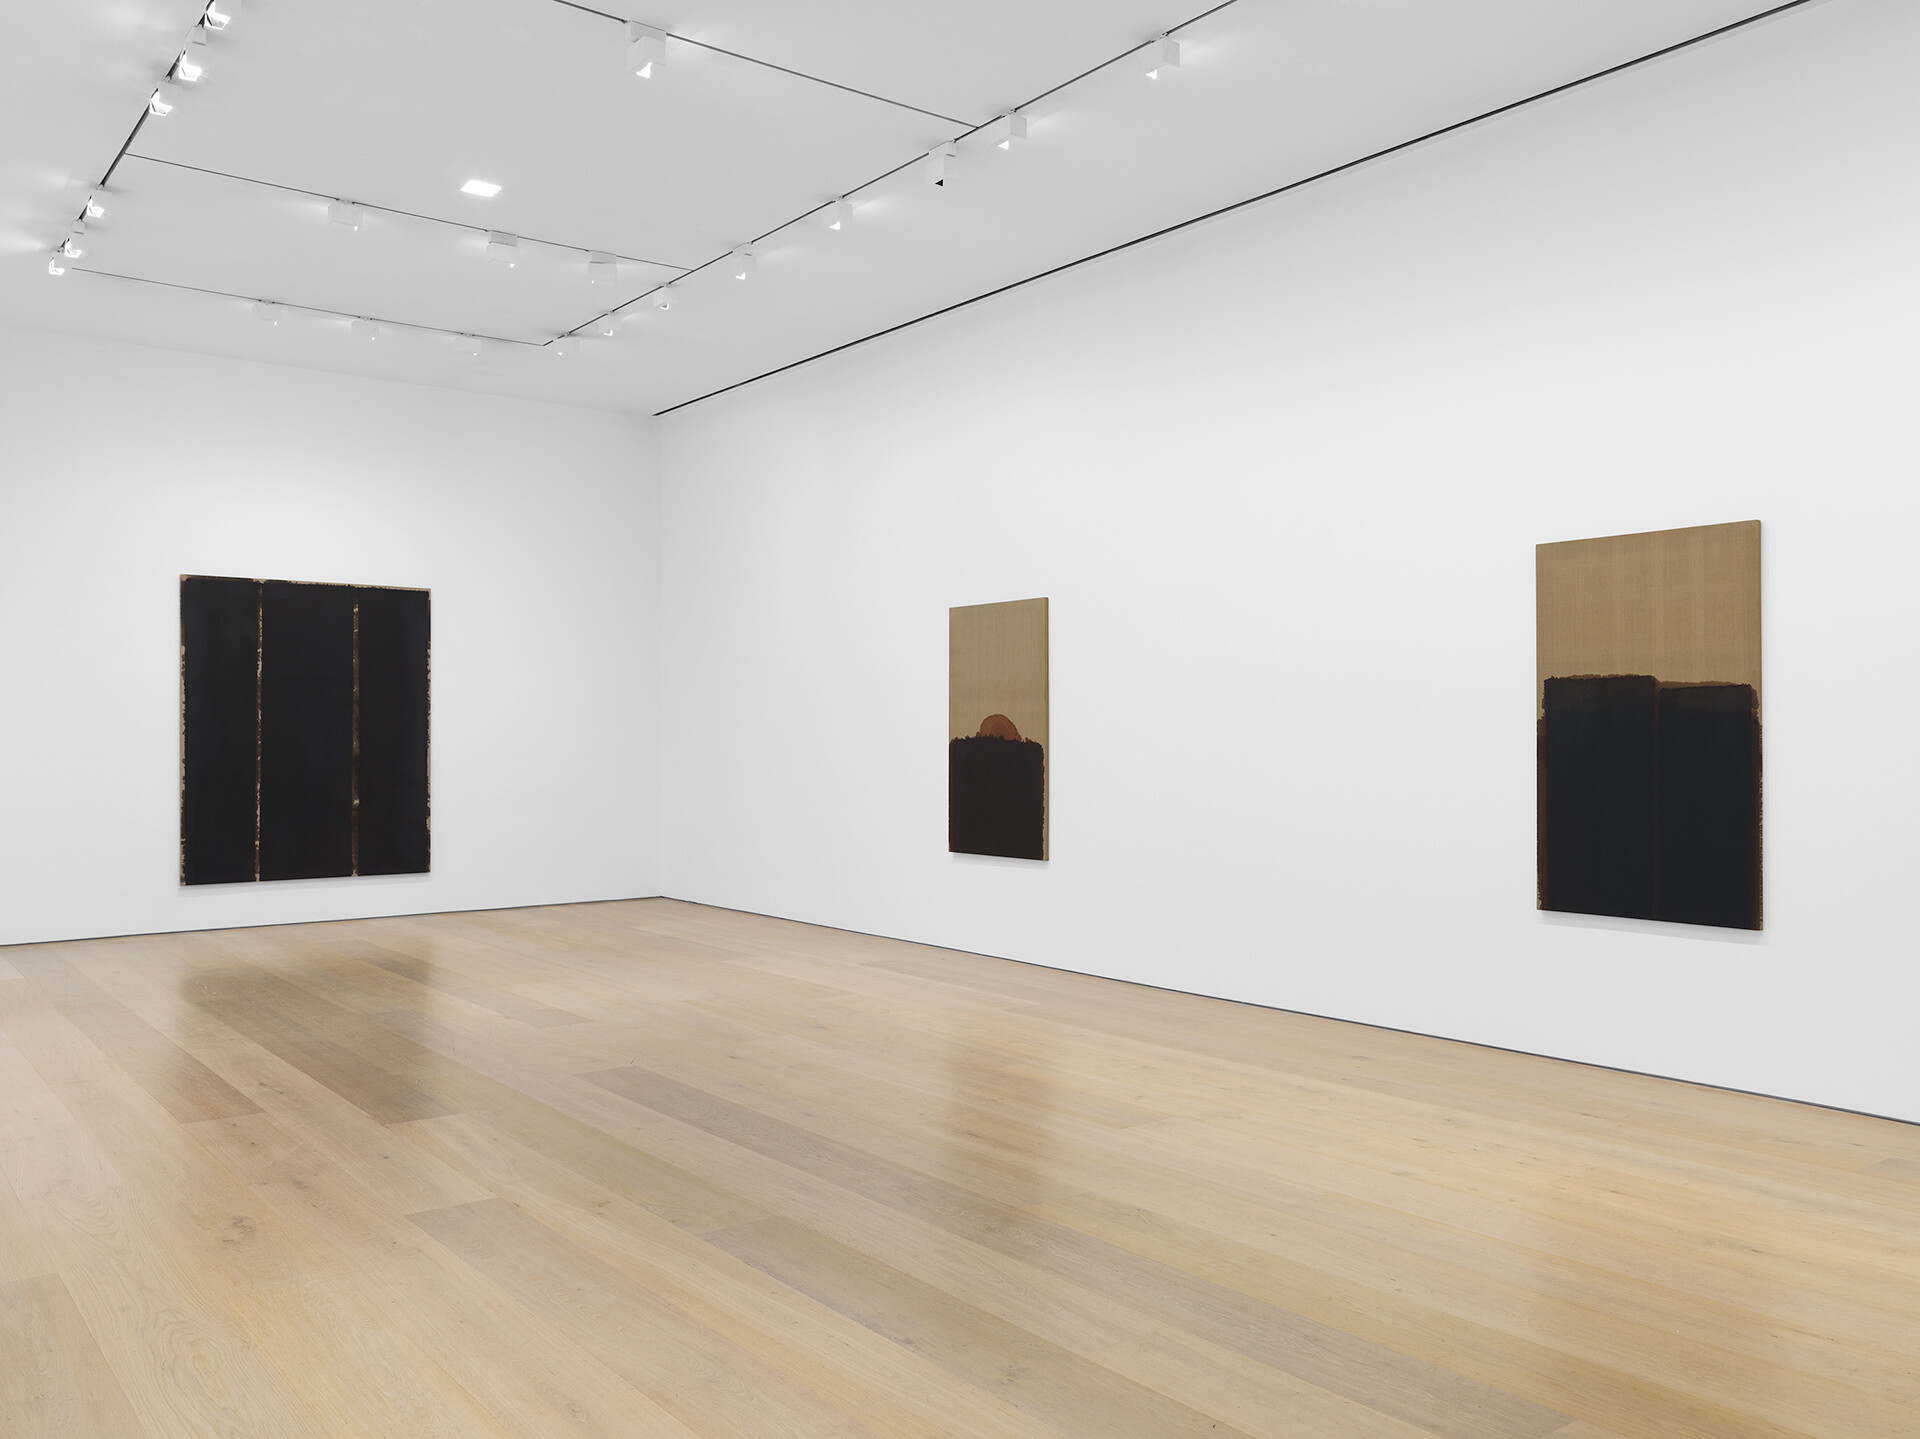 An installation view of an exhibition of paintings by Yun Hyong-keun at David Zwirner, New York, in 2020.